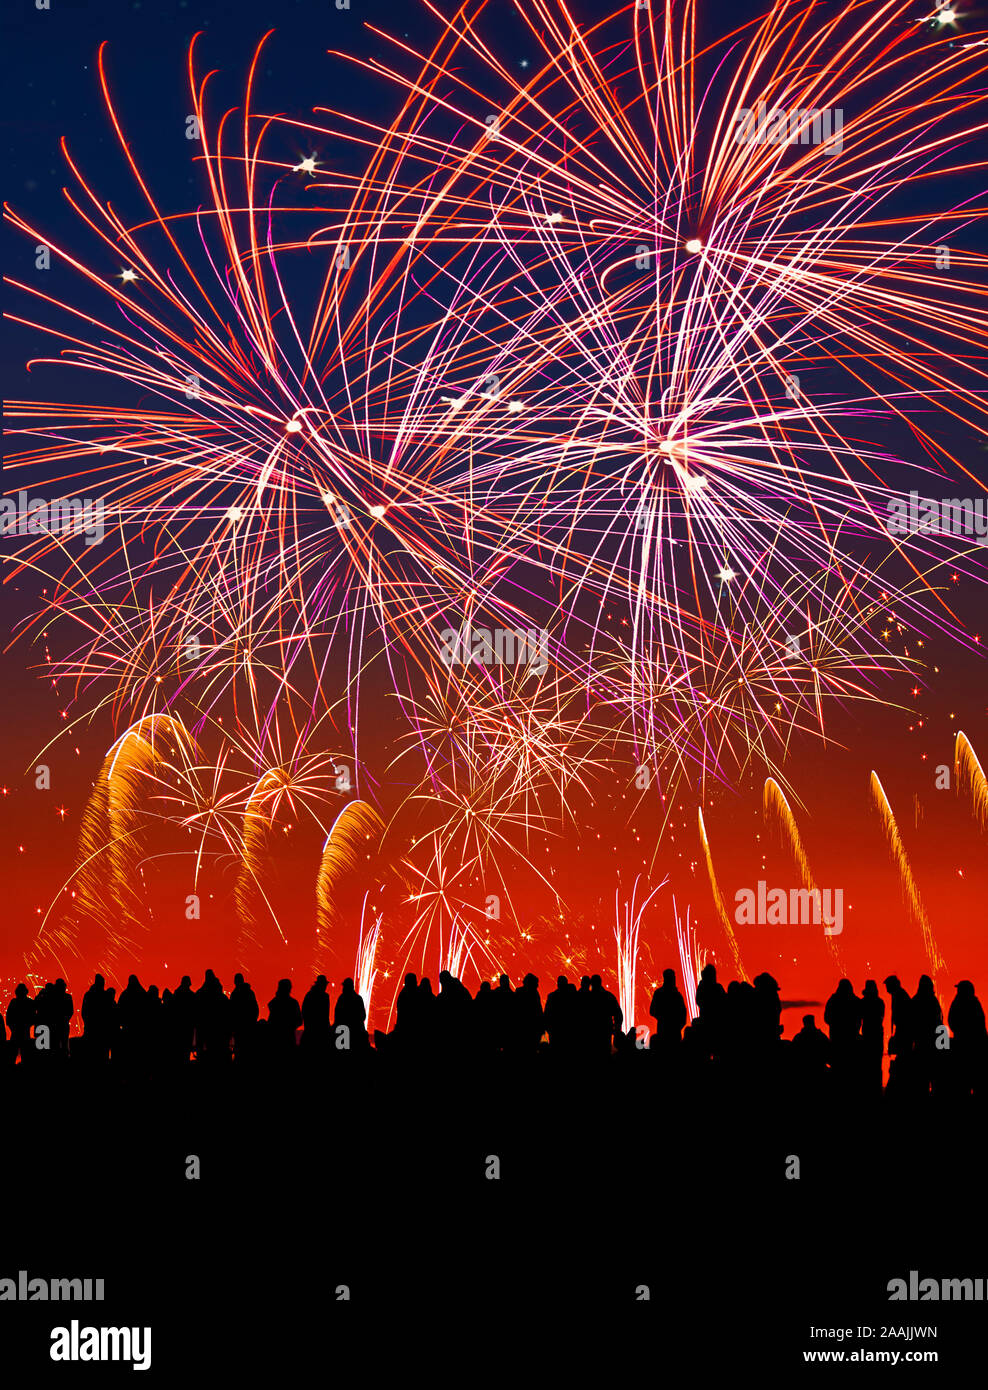 Silhouette of people at a firework display. Stock Photo